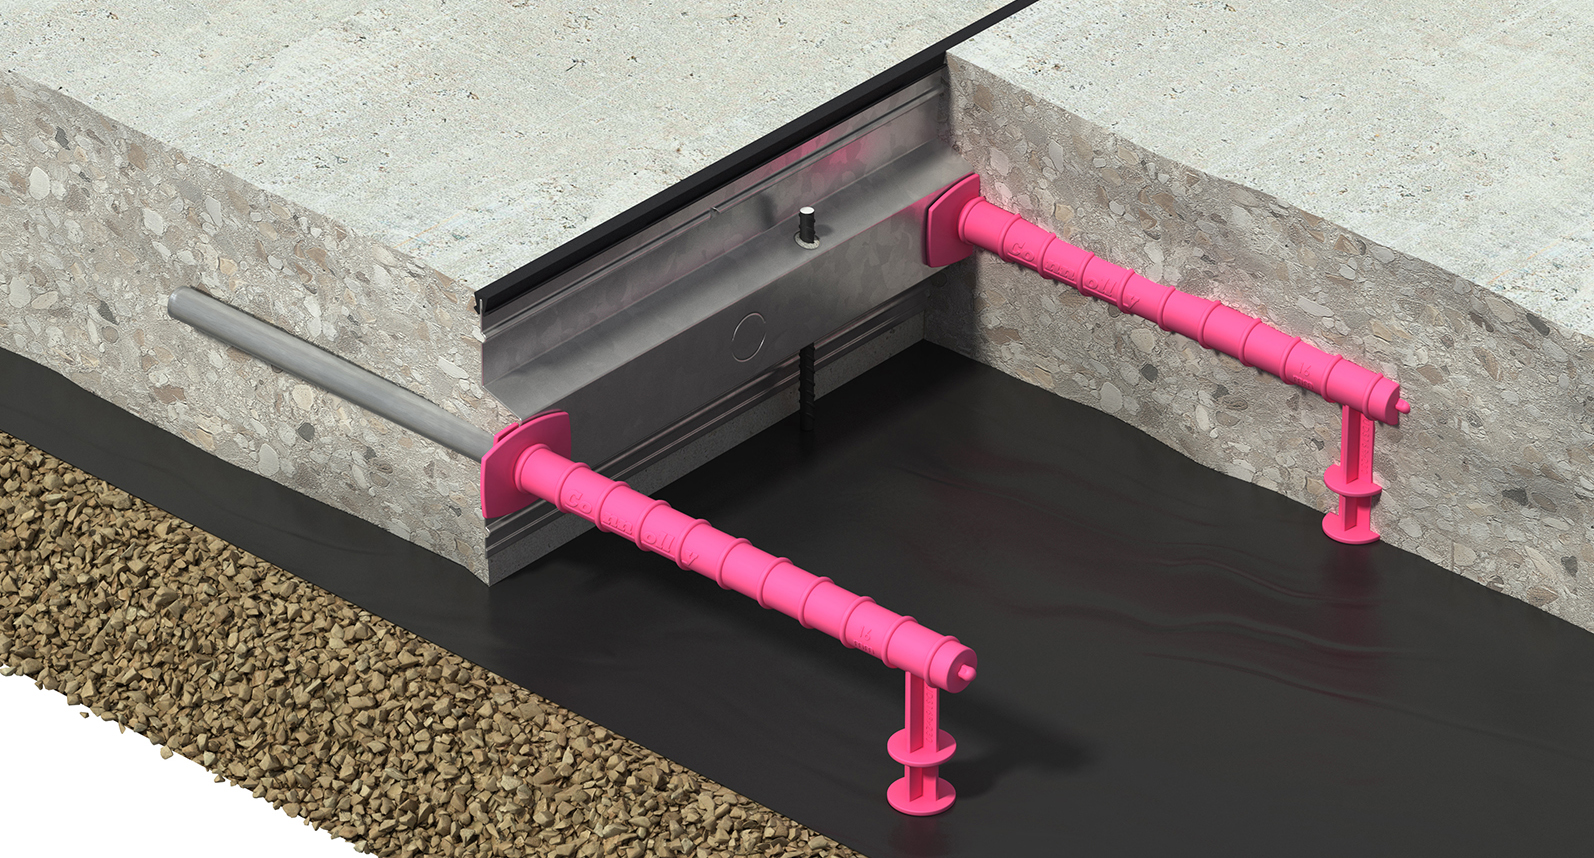 How to use expansion joint foam